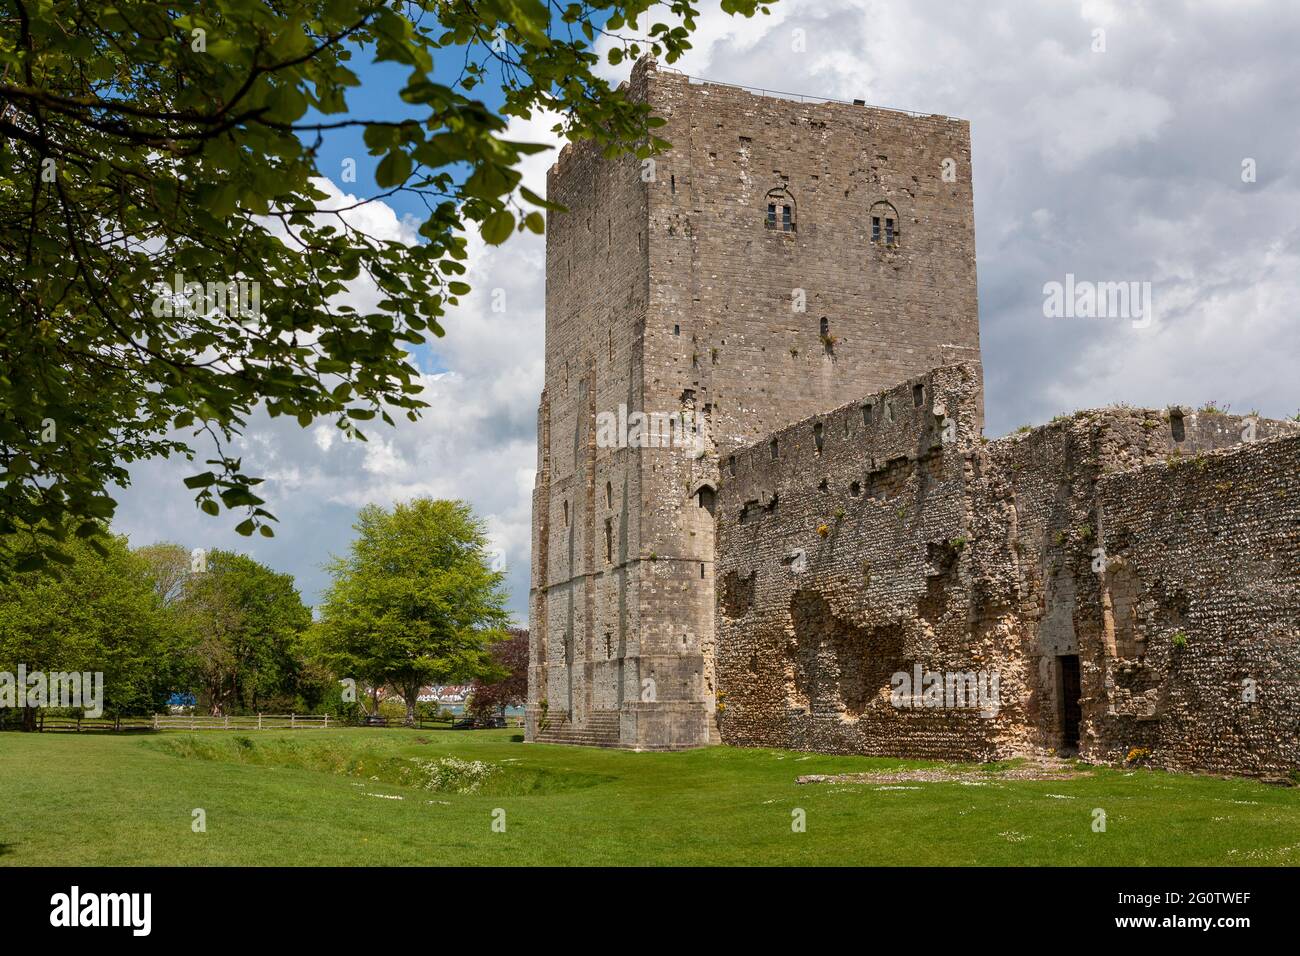 The Norman Keep of Portchester Castle, and part of the original Roman fort walls, Portchester, Hampshire, UK Stock Photo